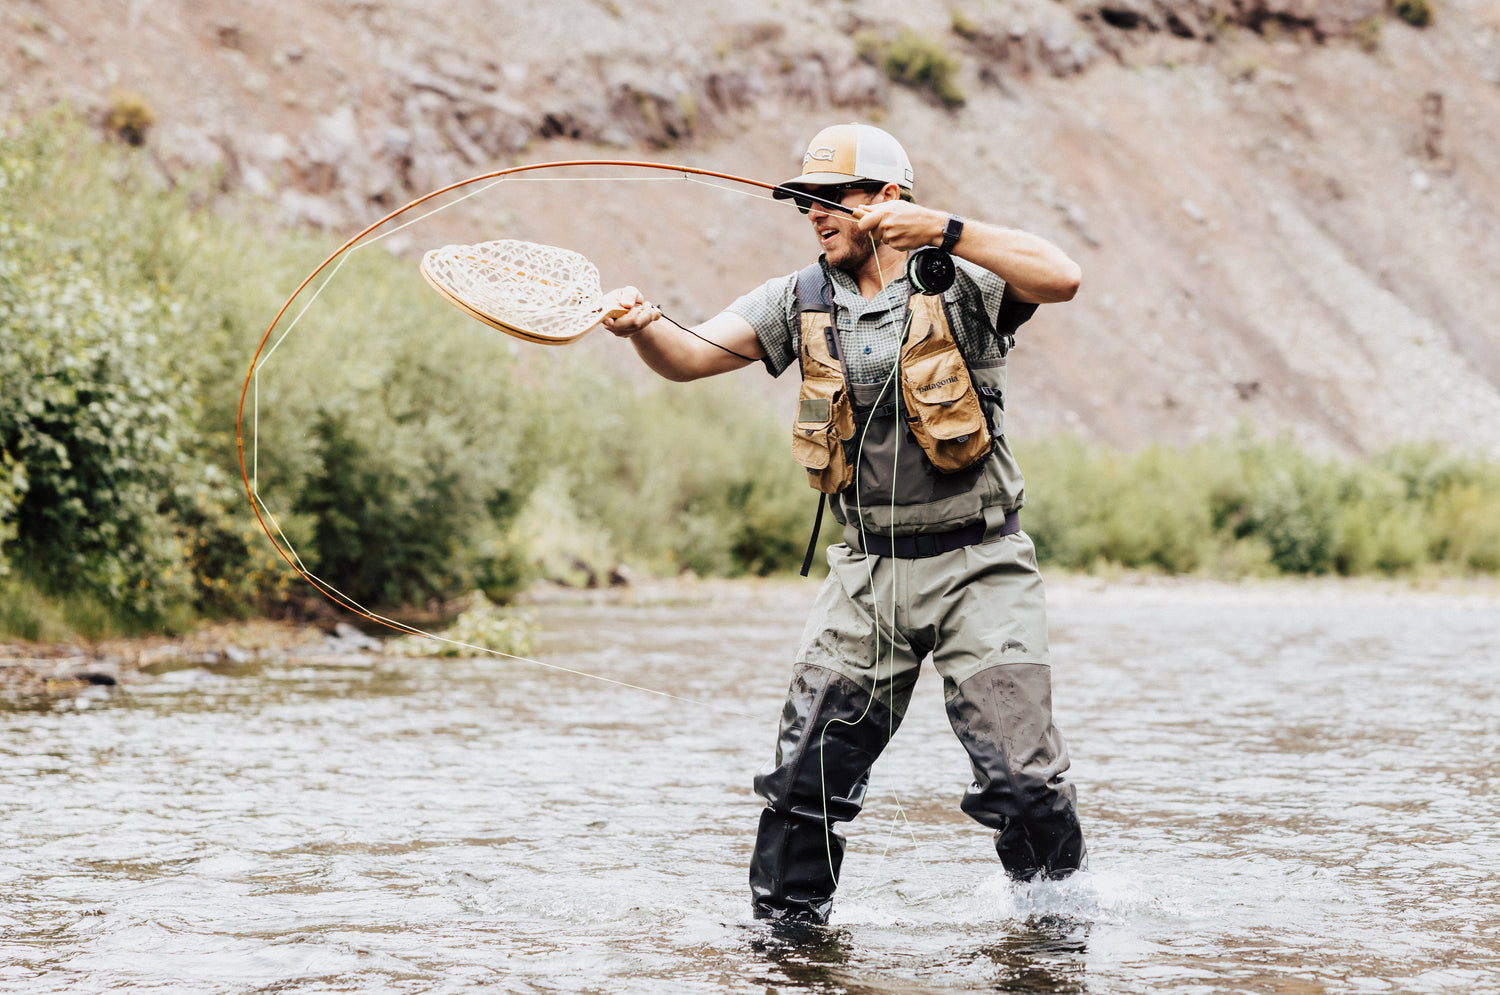 Fiberglass Fly Rods: Why They’re Great and How to Fish Them